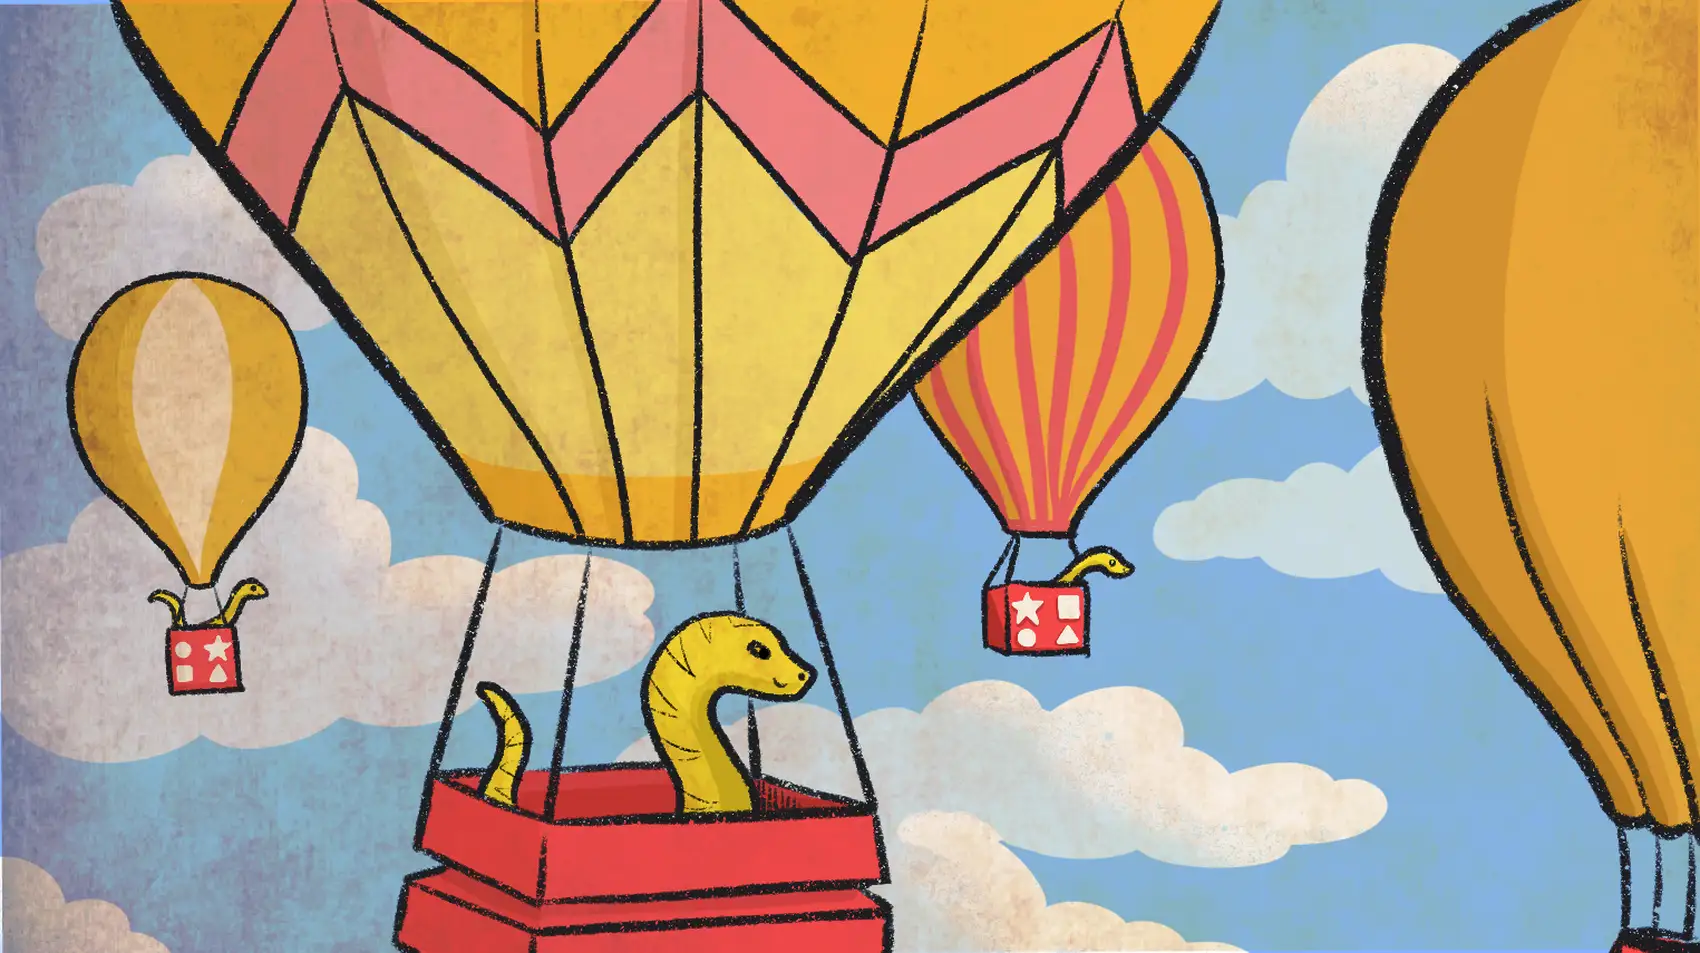 Cute cartoon snakes flying in hot air balloons with Redis-related logo on the side.